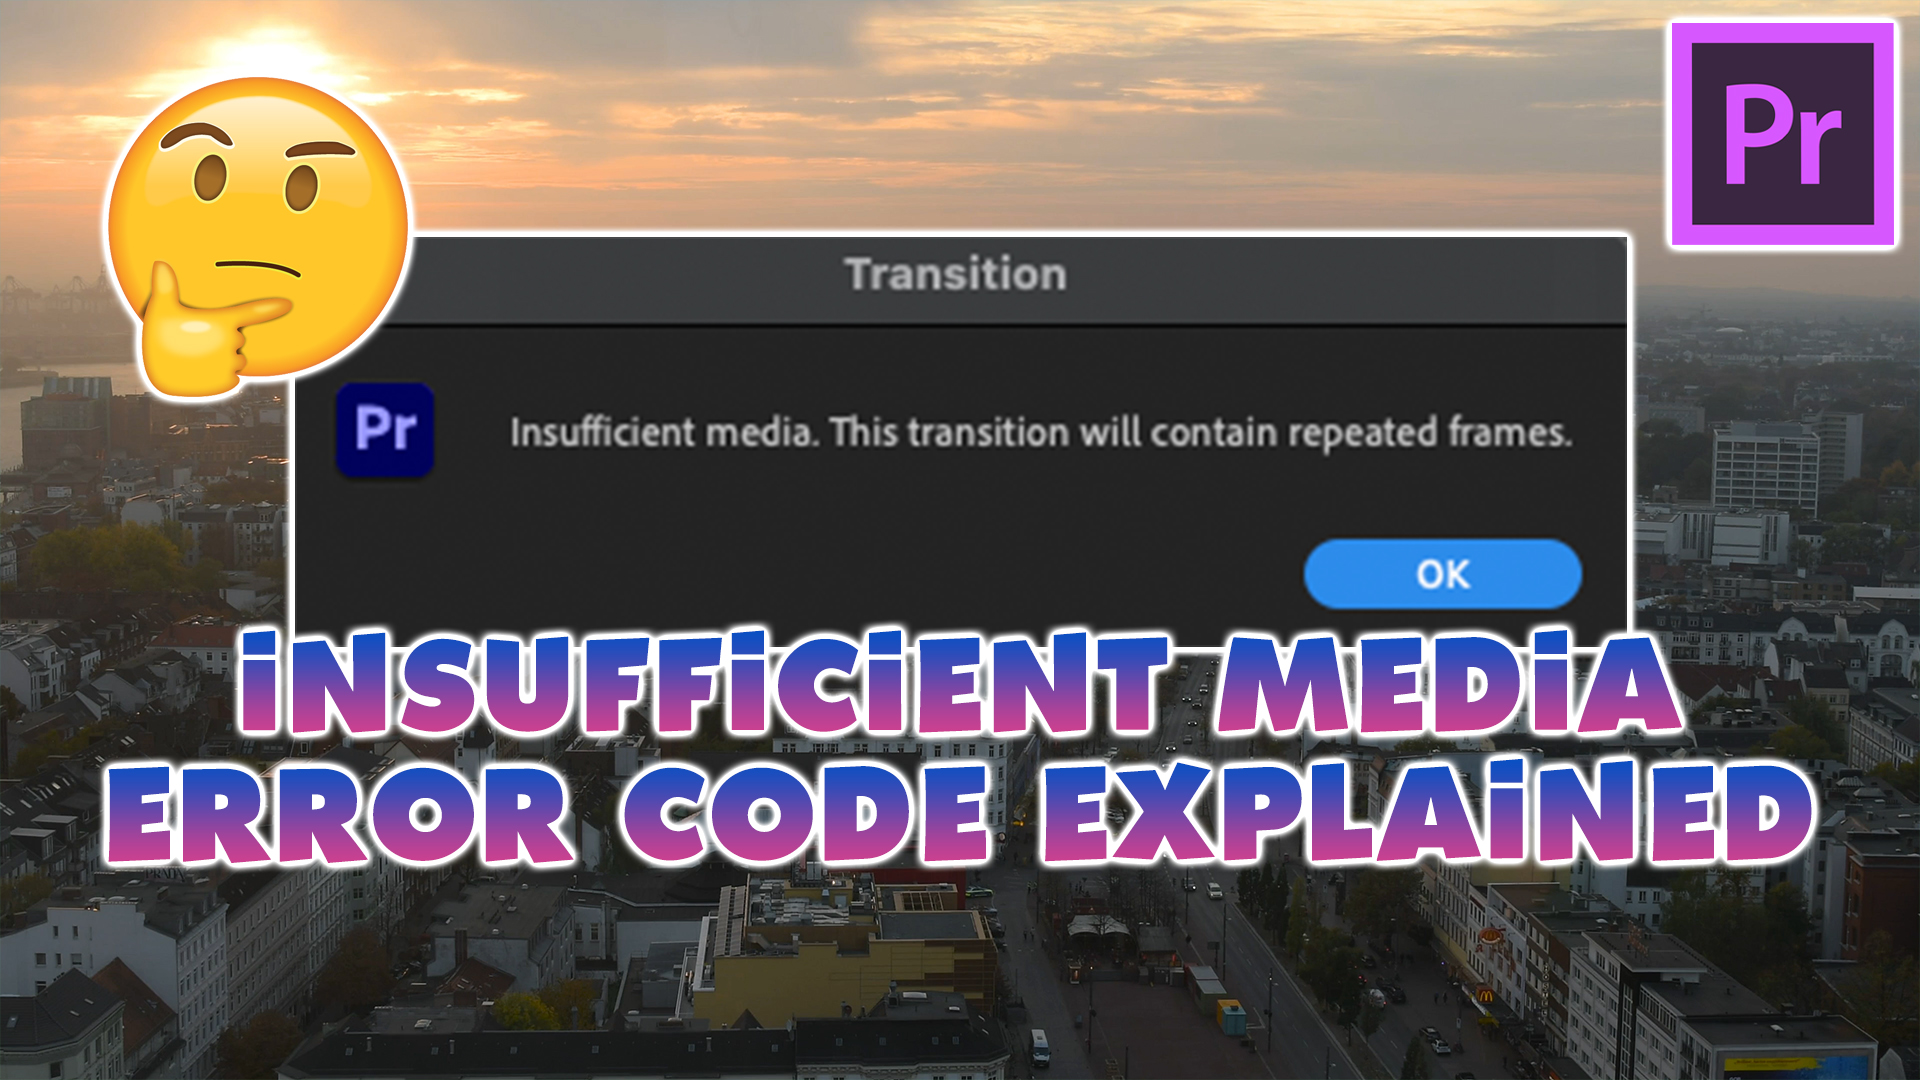 Premiere Pro Error Code Explained: Insufficient Media This Transition Will Contain Repeated Frames